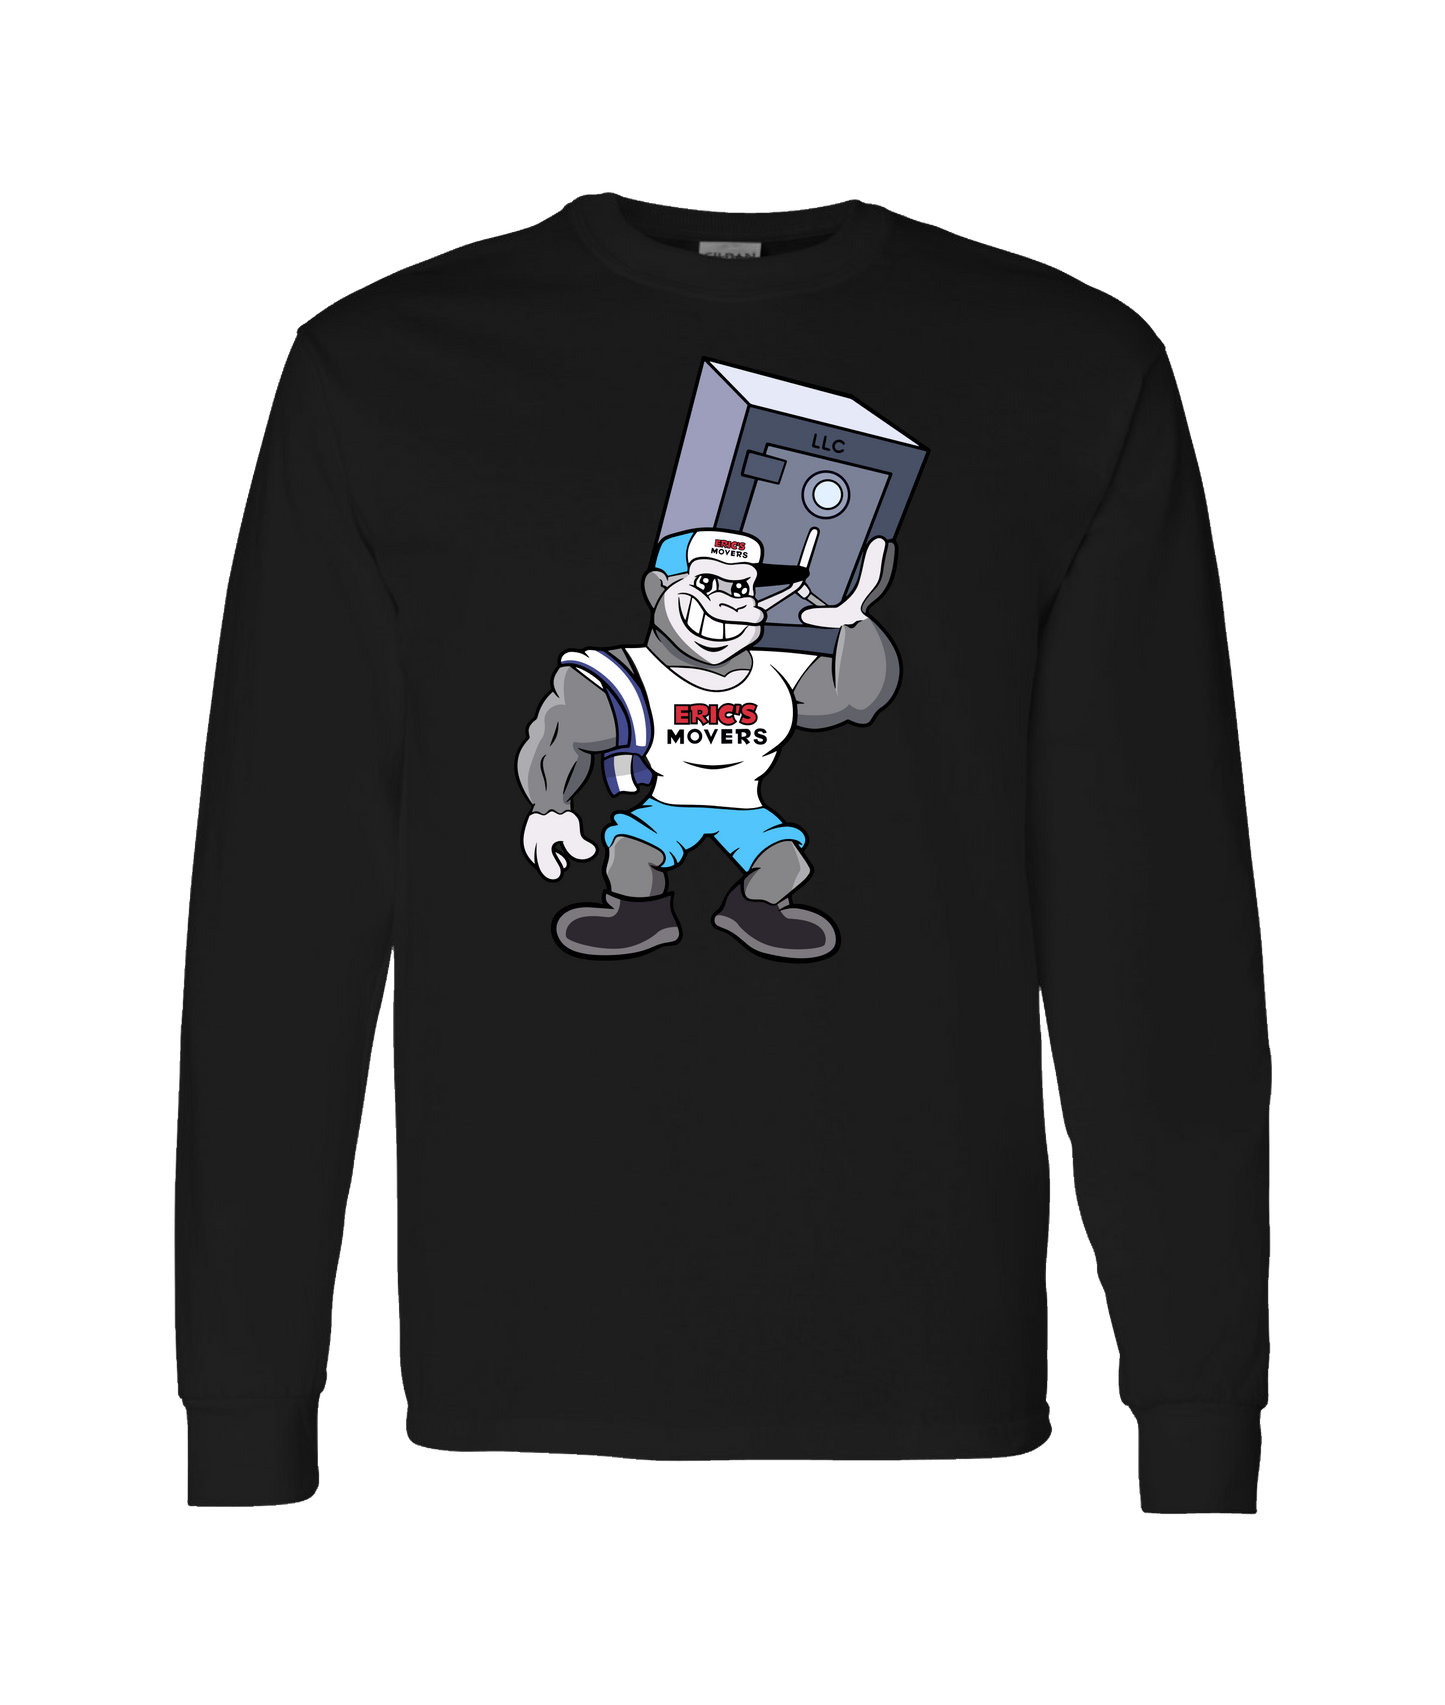 Eric's Movers - One Arm - Black Long Sleeve T